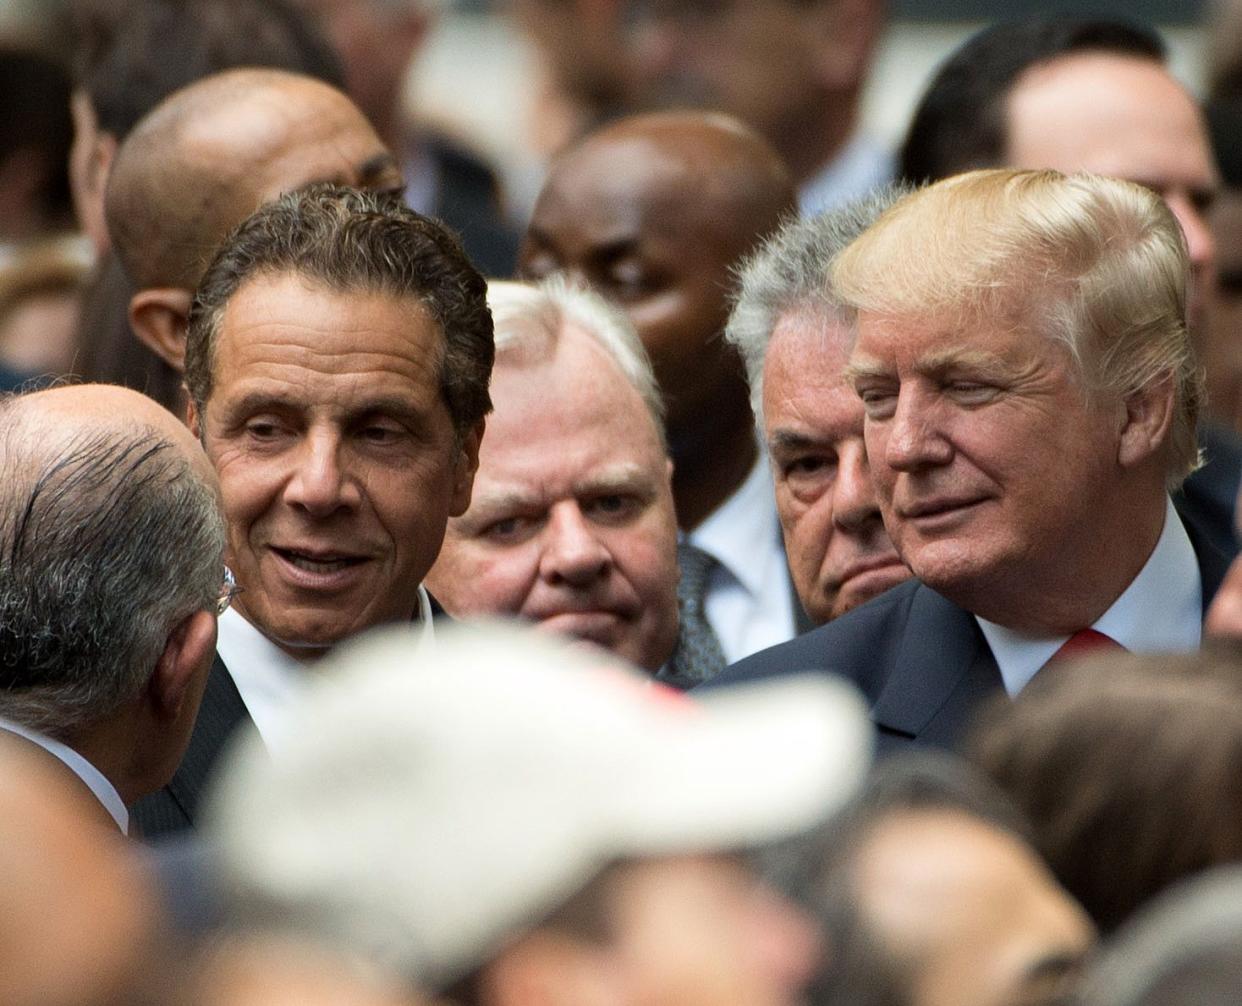 New York Governor Andrew Cuomo (left) and (as then-Republican presidential candidate Donald Trump (right) at the 15th anniversary of September 11 at the 9/11 Memorial and Museum in Lower Manhattan, New York on Sep. 11, 2016. 